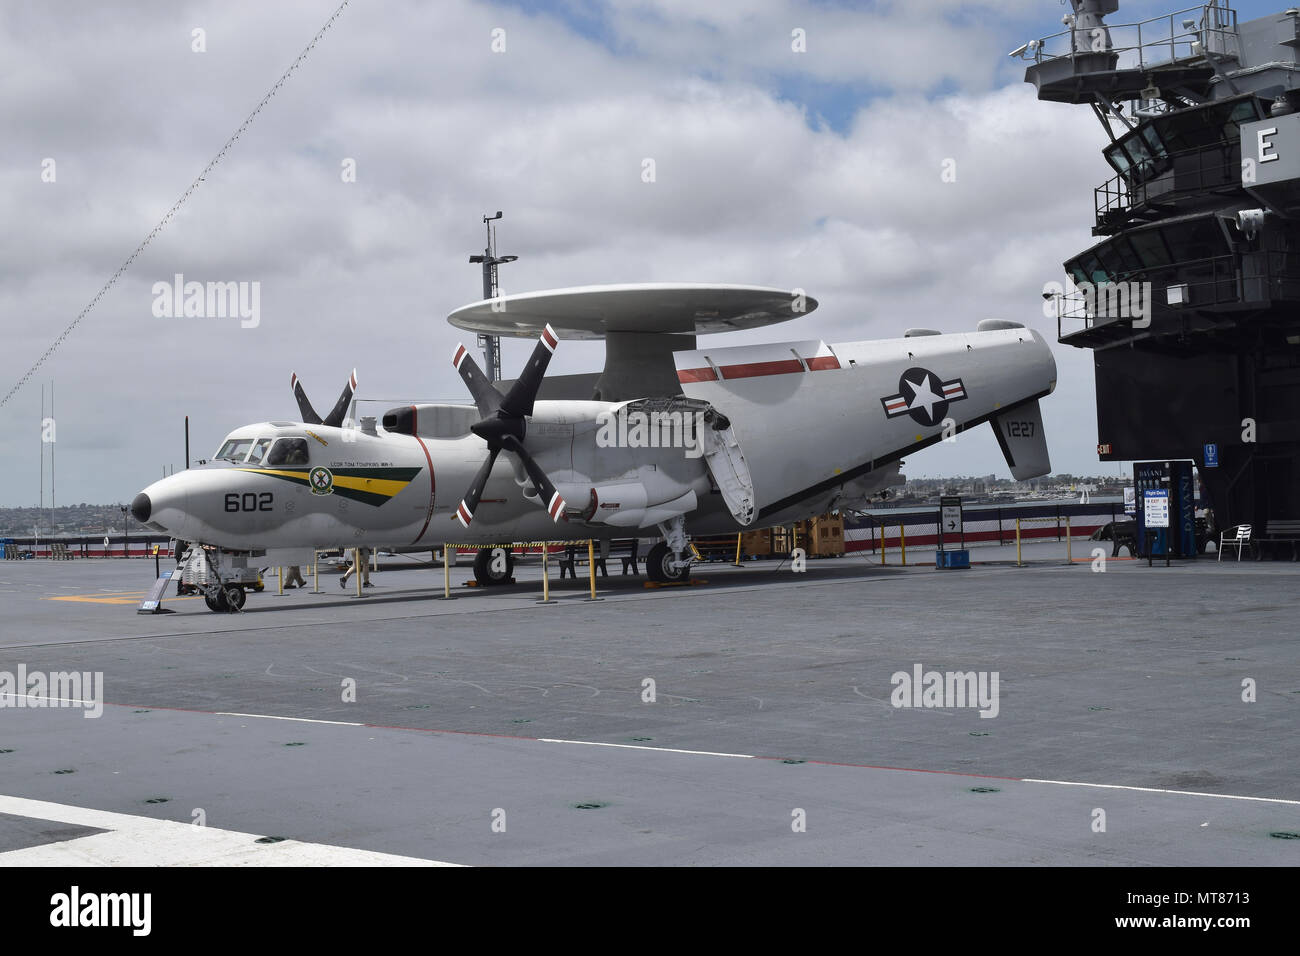 E-2 Hawkeye, early warning propeller aircraft,  on the flight deck of the USS Midway Museum, aircraft Carrier, San Diego, California Stock Photo